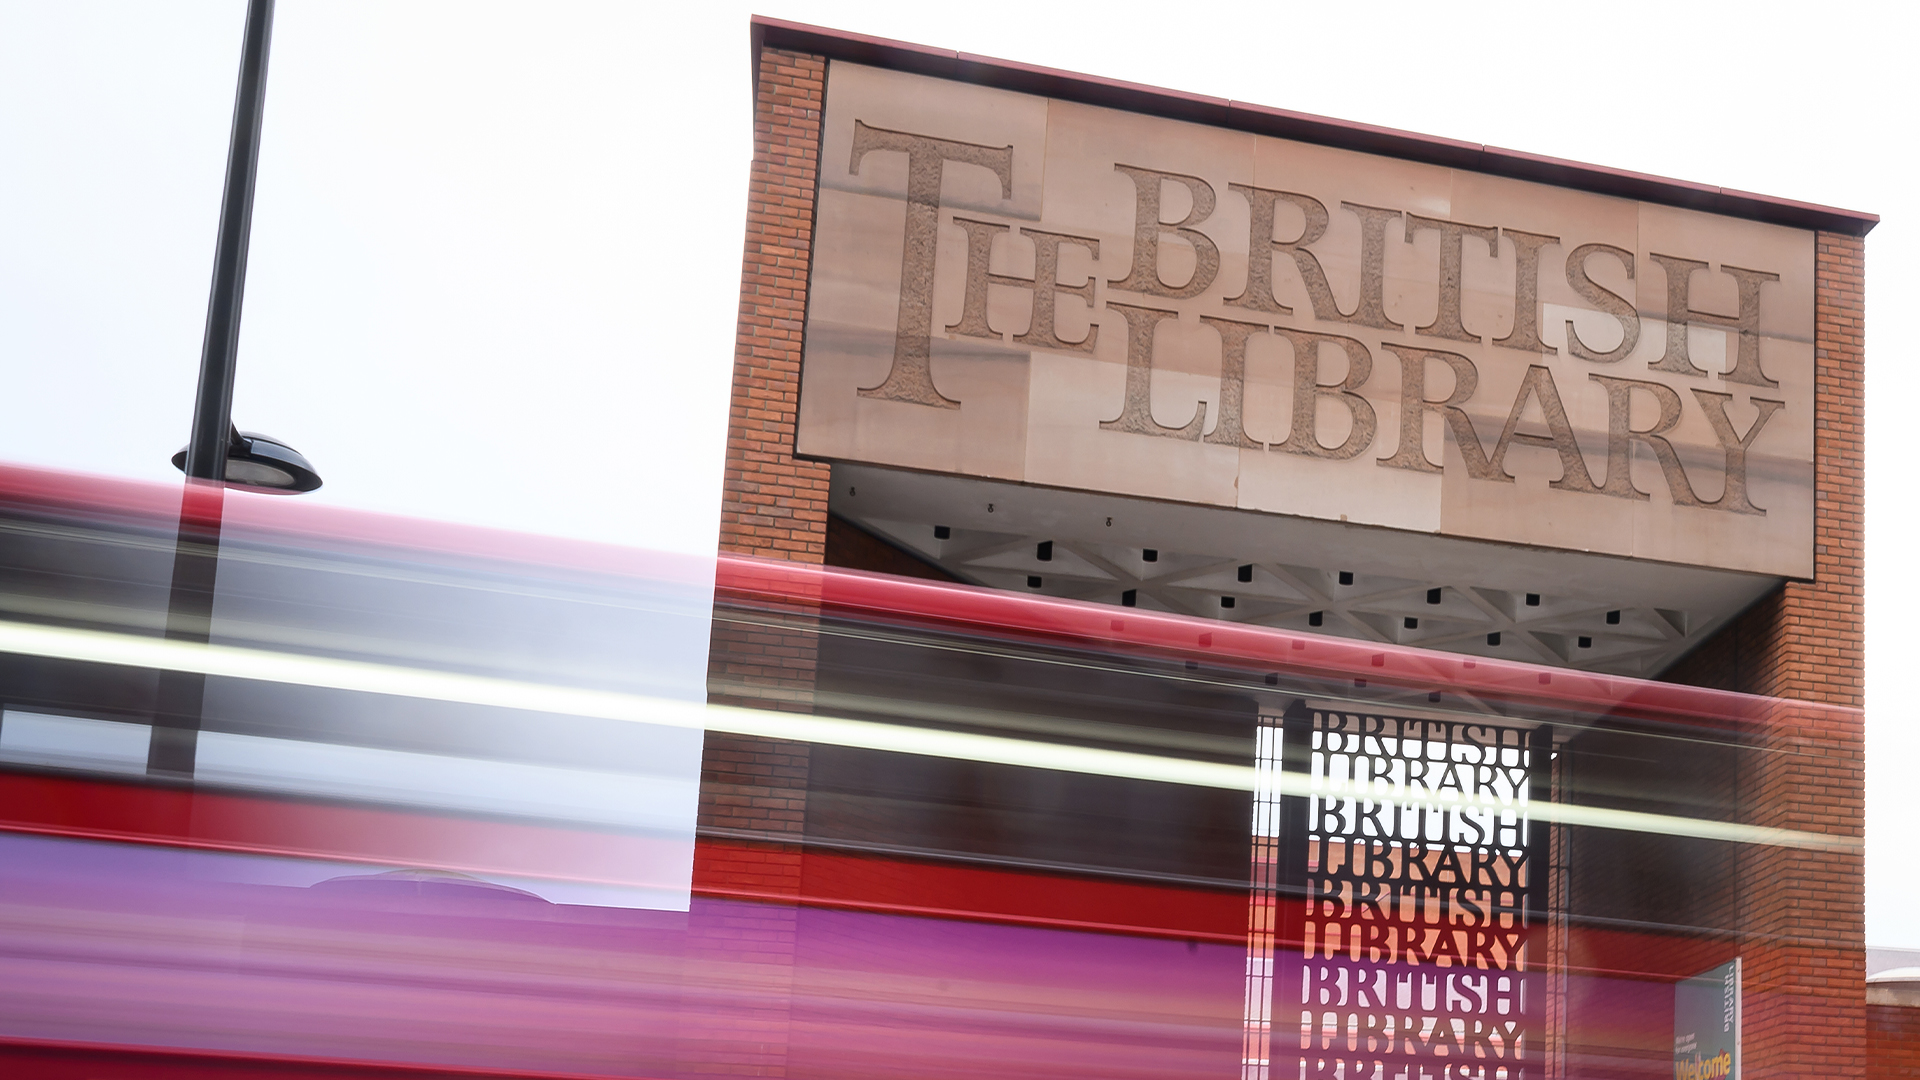 British Library says reliance on complex legacy infrastructure hampered recovery from cyberattacks